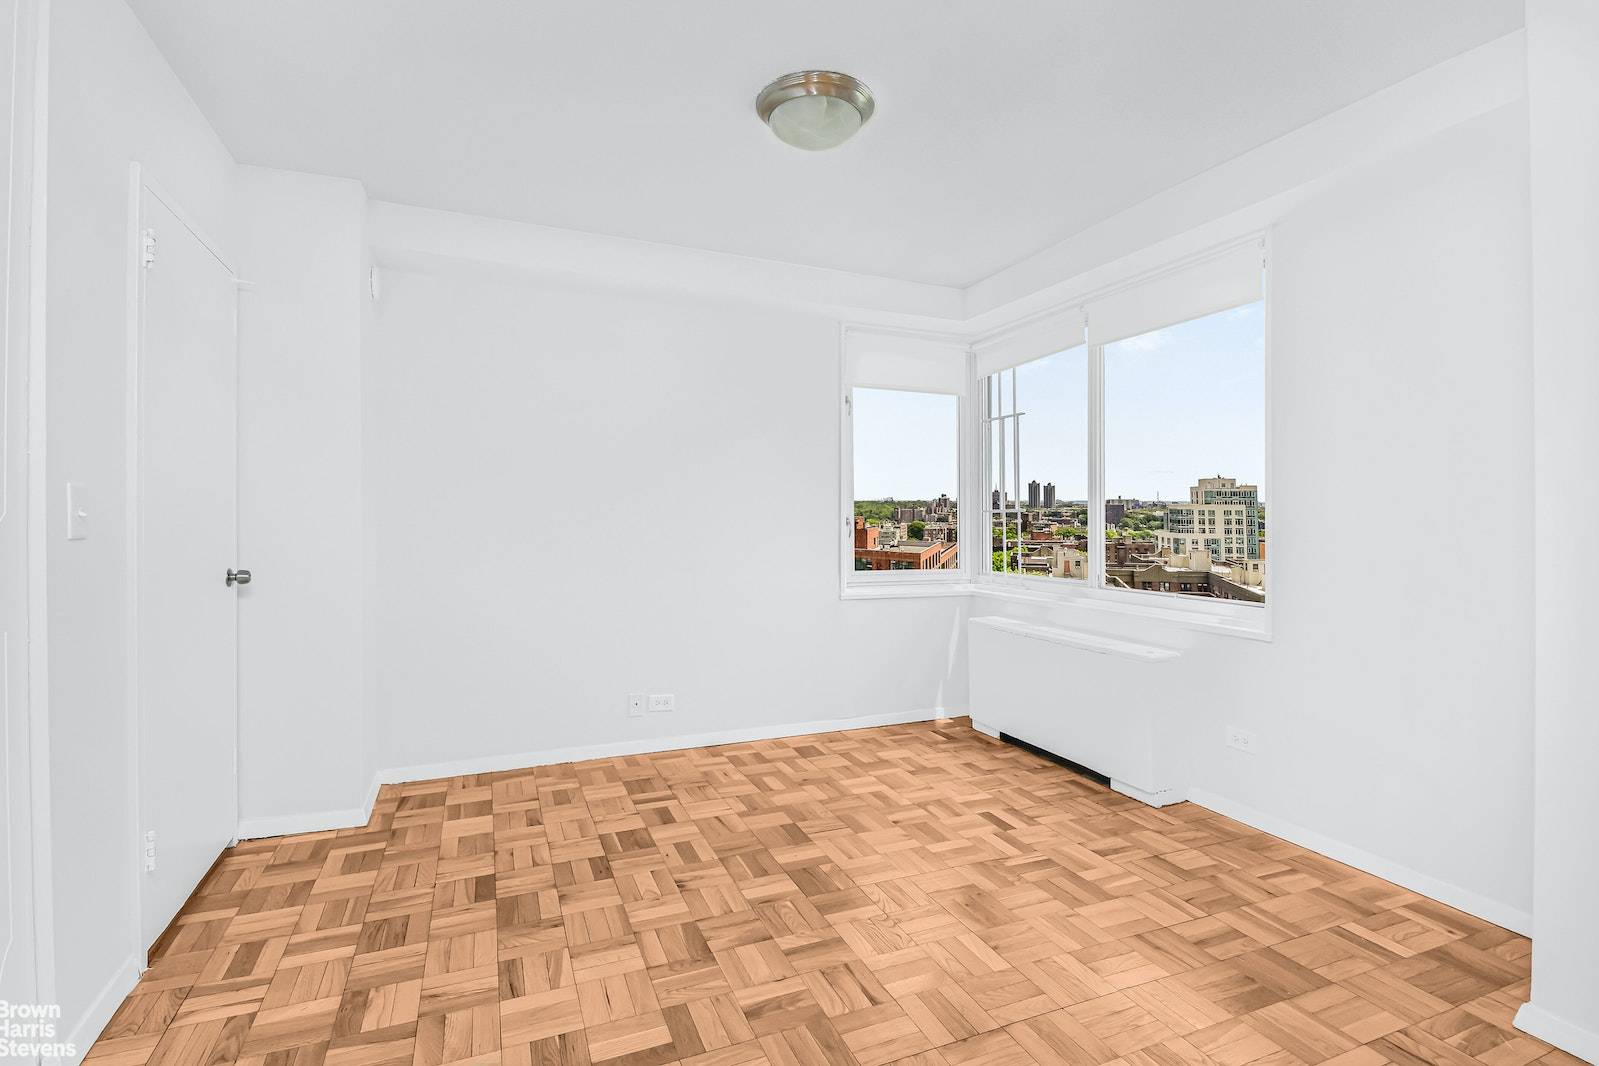 No Board Approval for this newly renovated Jr4 with a terrace at the sought after Whitehall.